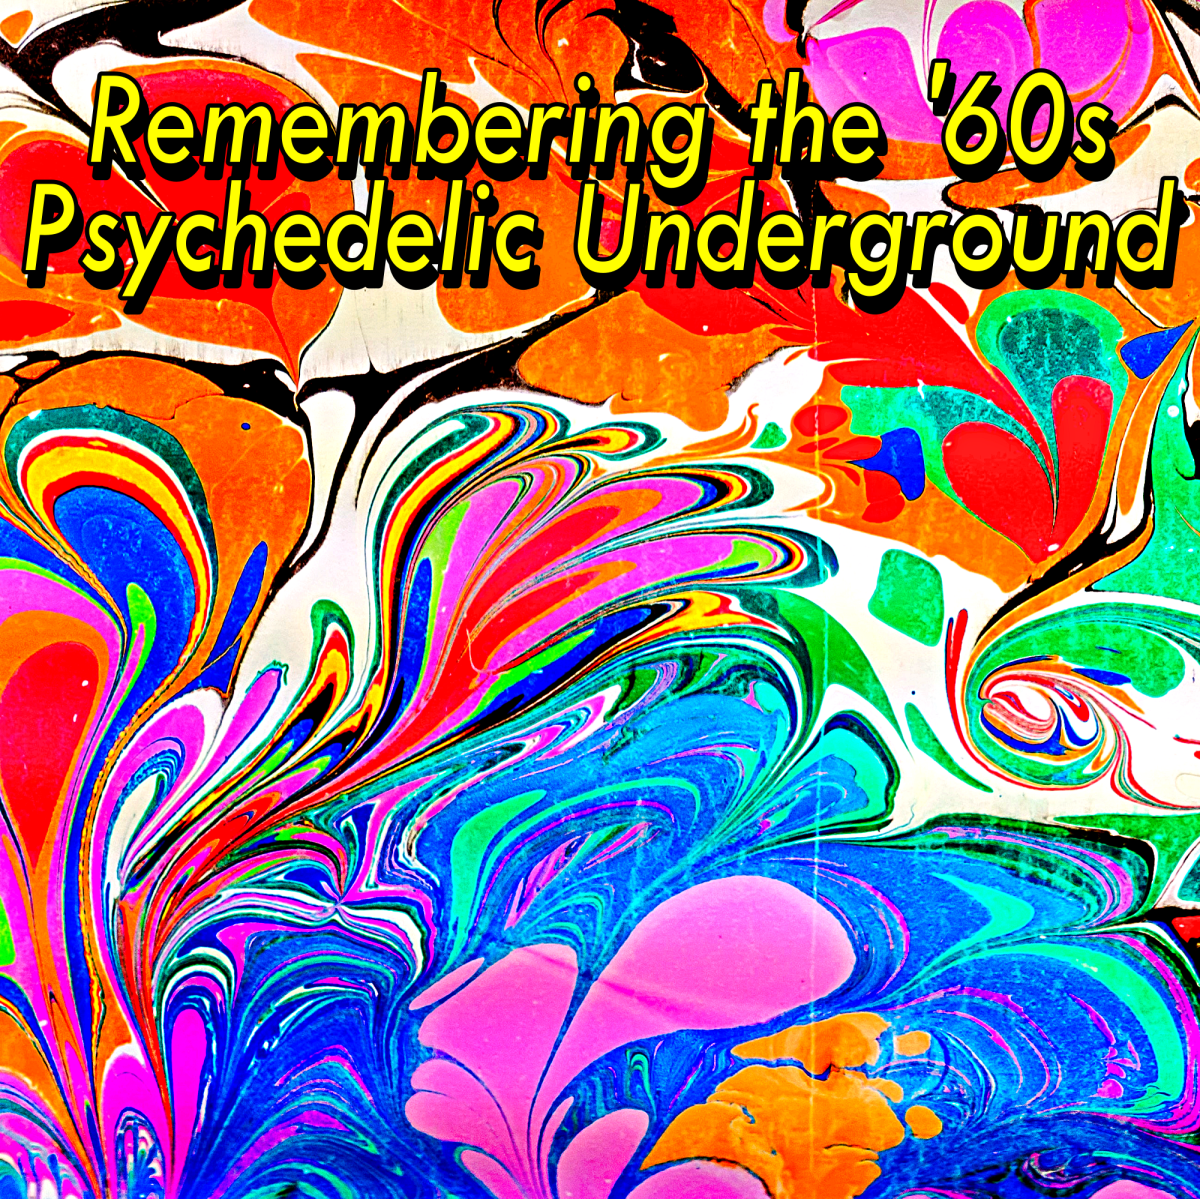 12 Great Underground '60s Psychedelic Bands